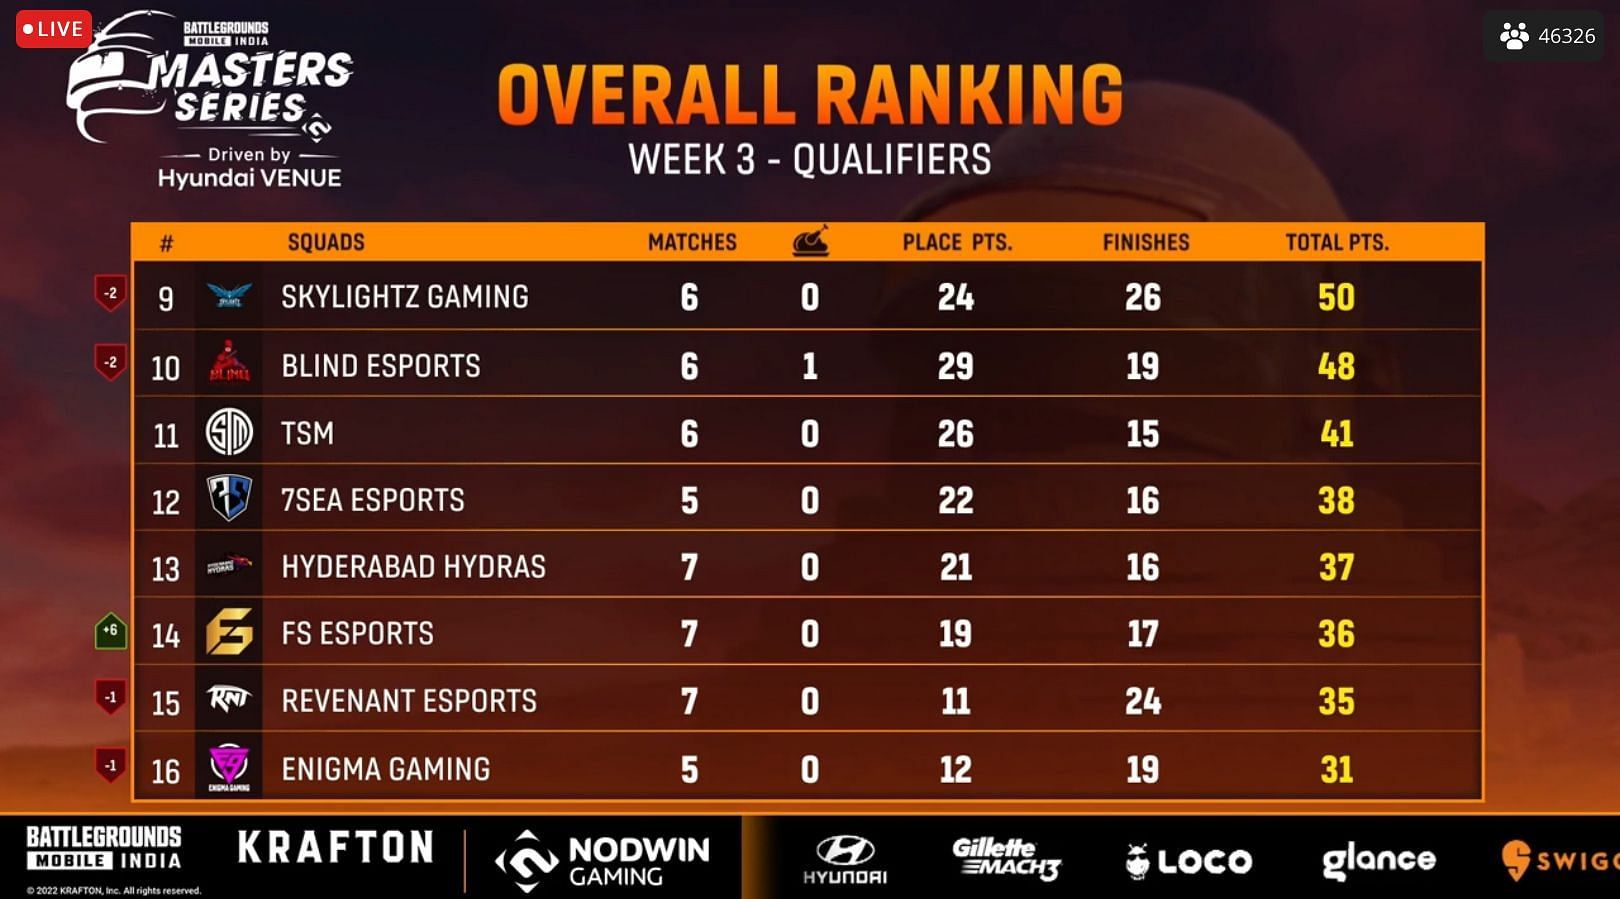 TSM finished 11th after BGMI Masters Series Week 3 Day 3 (Image via Loco)